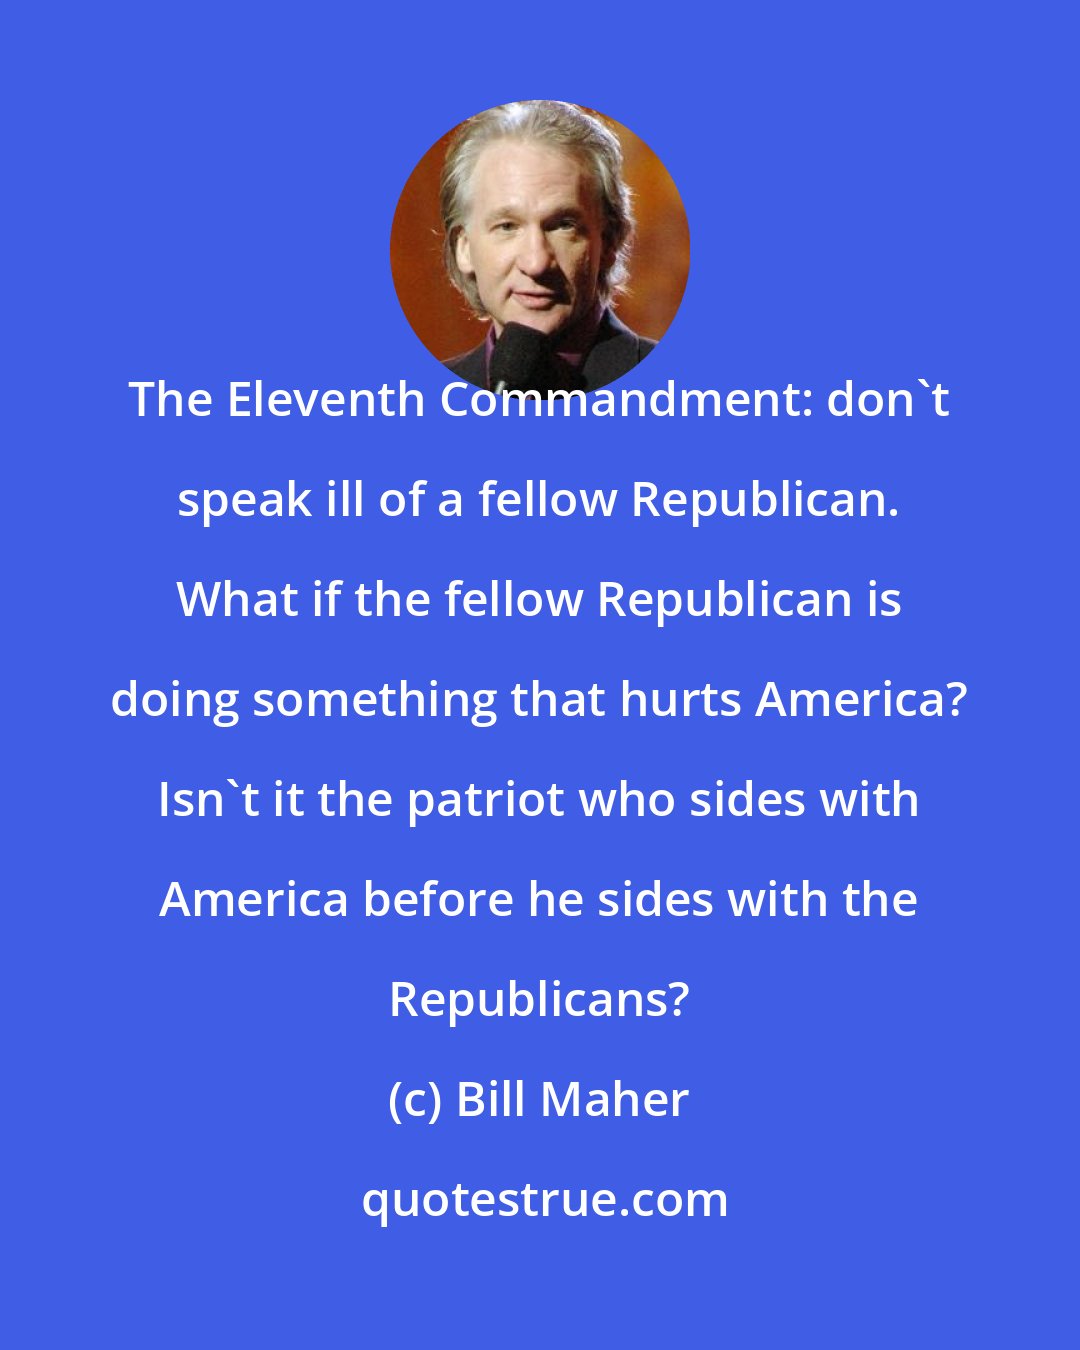 Bill Maher: The Eleventh Commandment: don't speak ill of a fellow Republican. What if the fellow Republican is doing something that hurts America? Isn't it the patriot who sides with America before he sides with the Republicans?